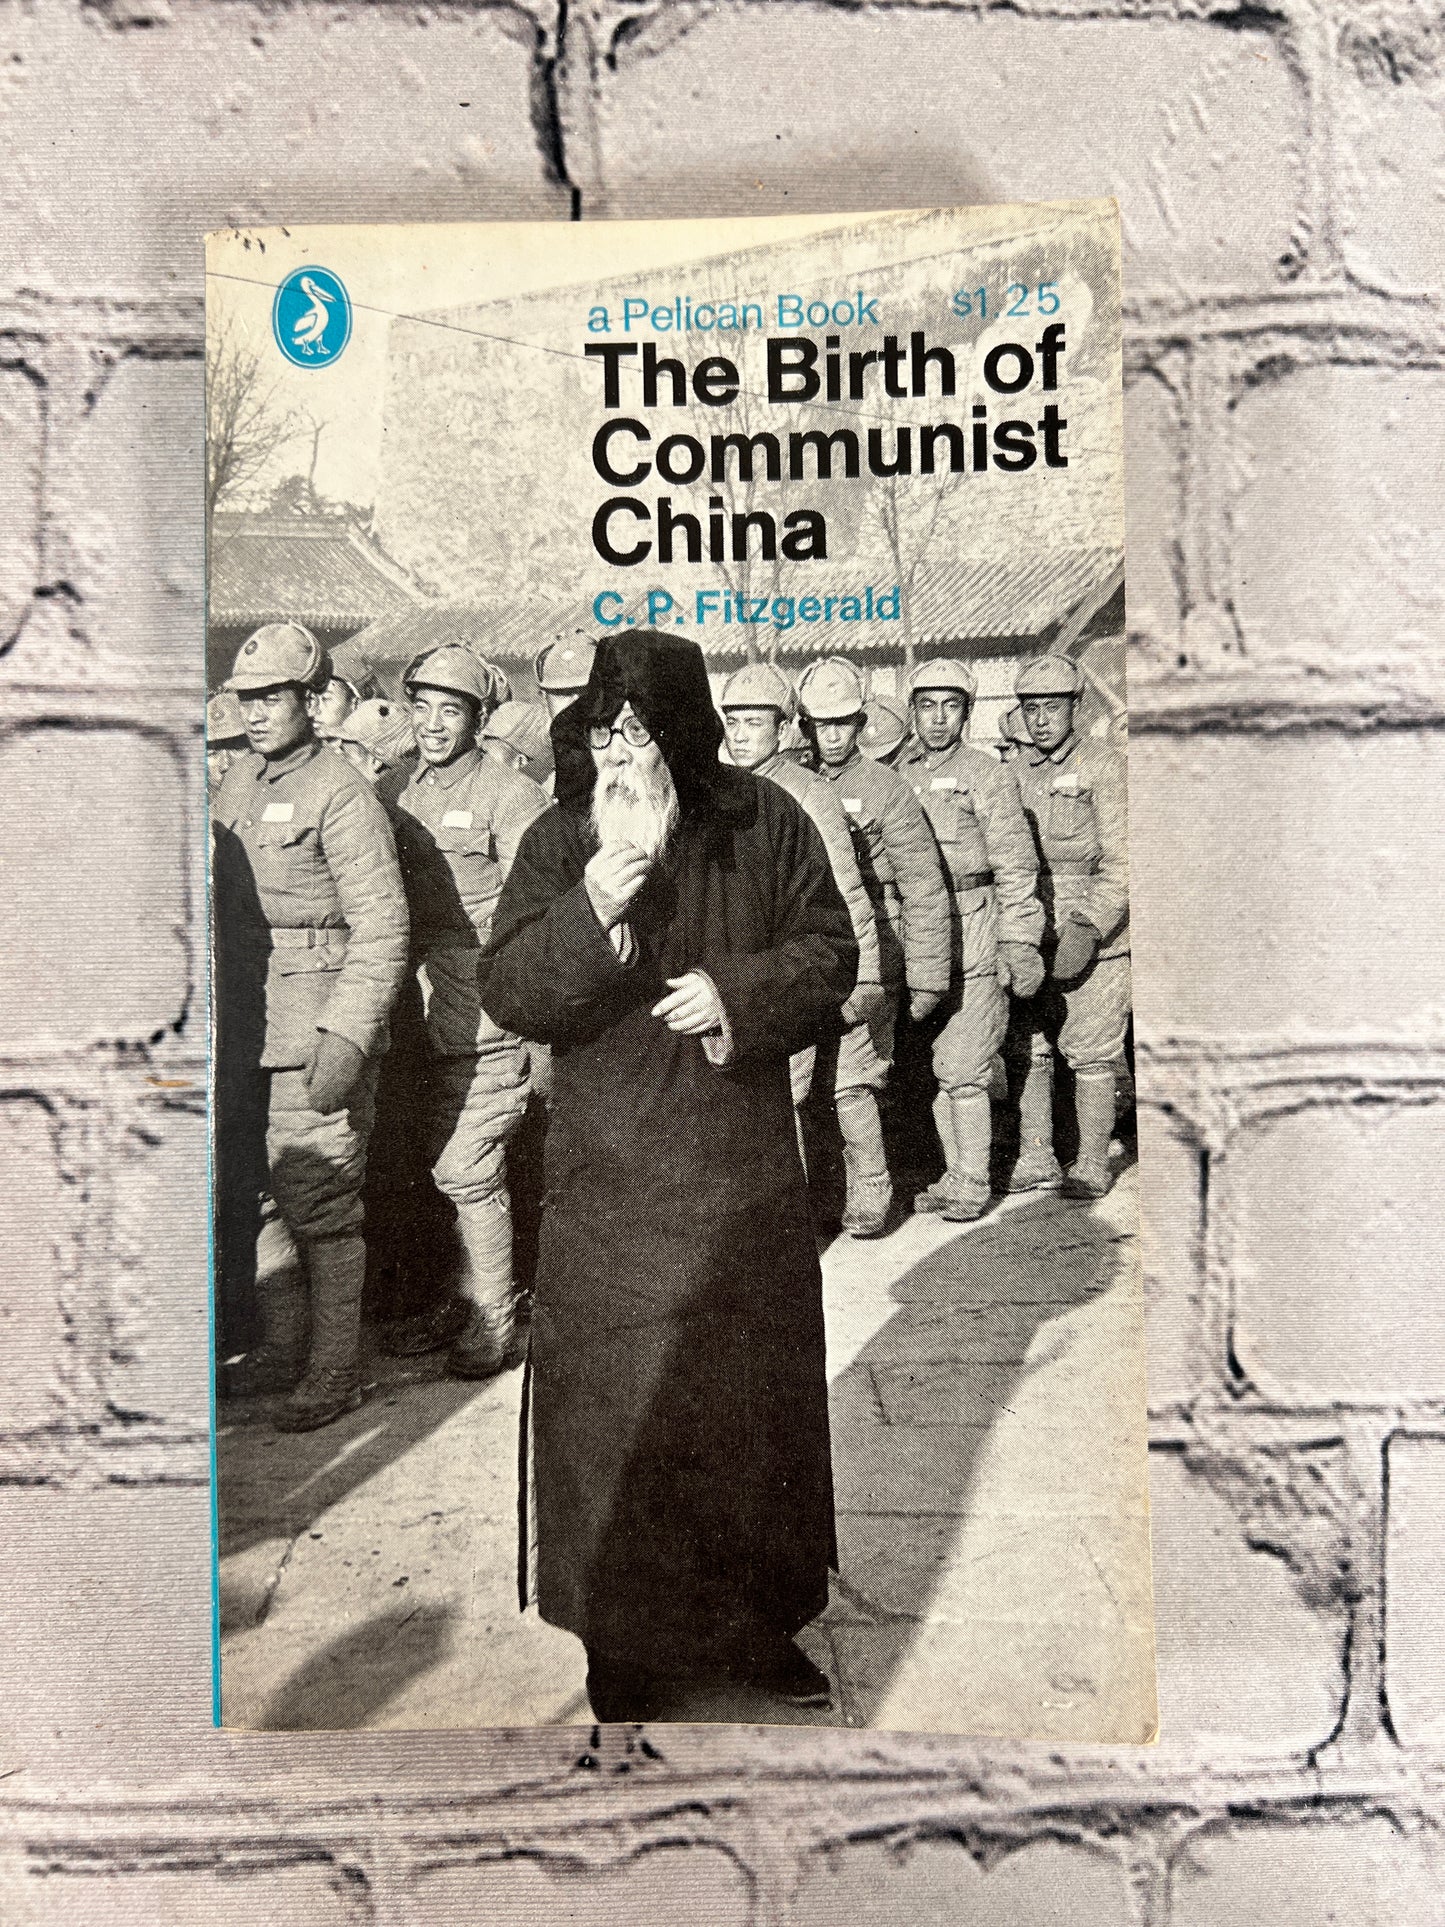 The Birth of Communist China by C. P. Fitzgerald [1967]